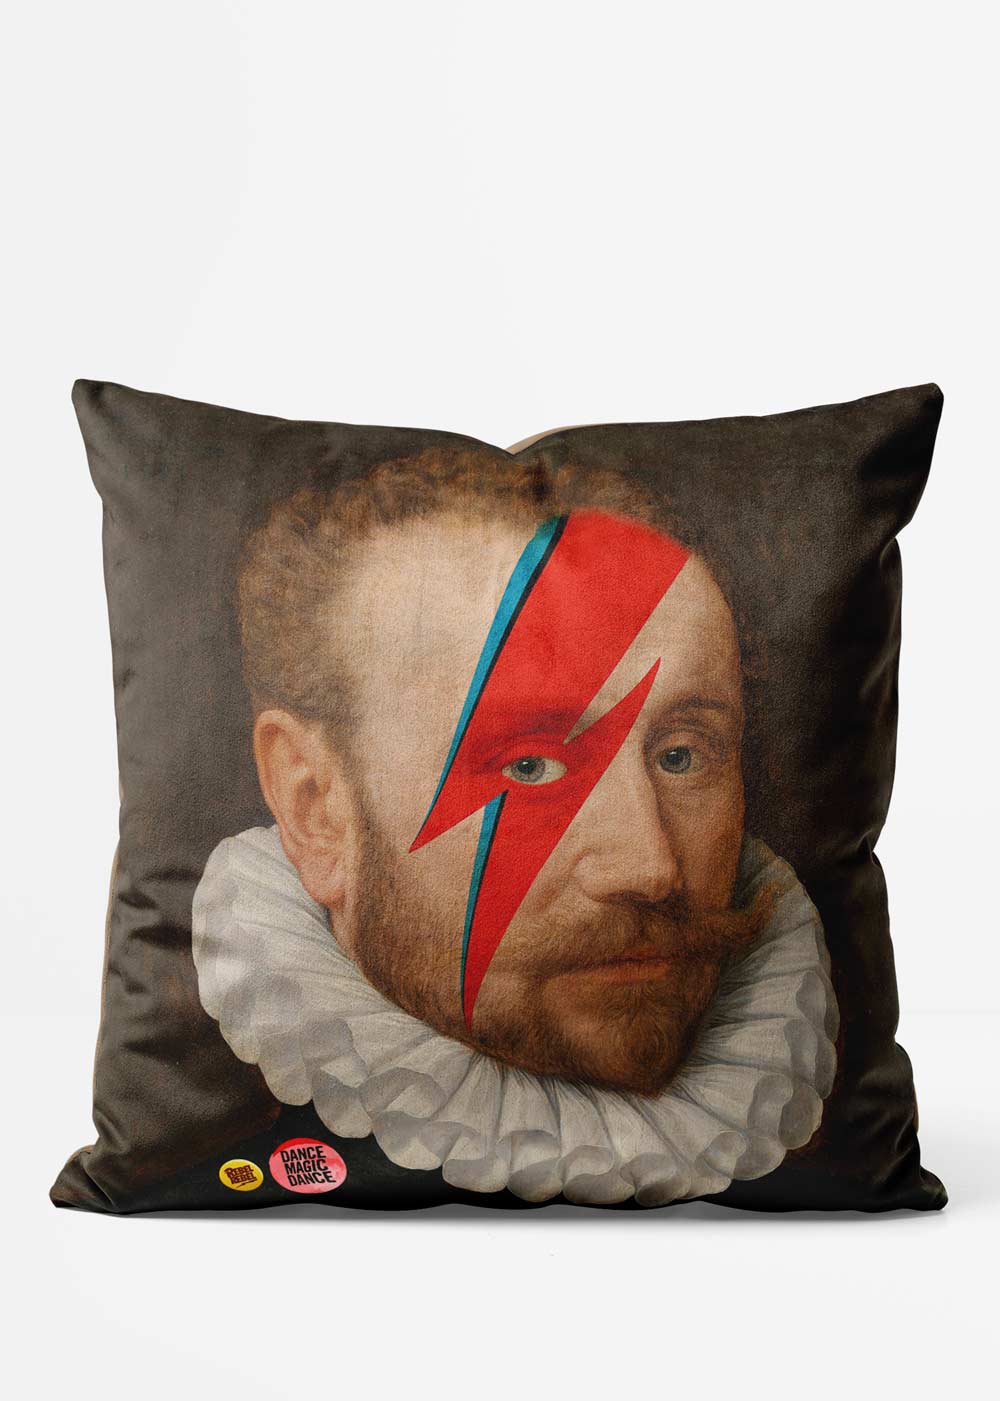 Rebel Bowie Altered Art Cushion